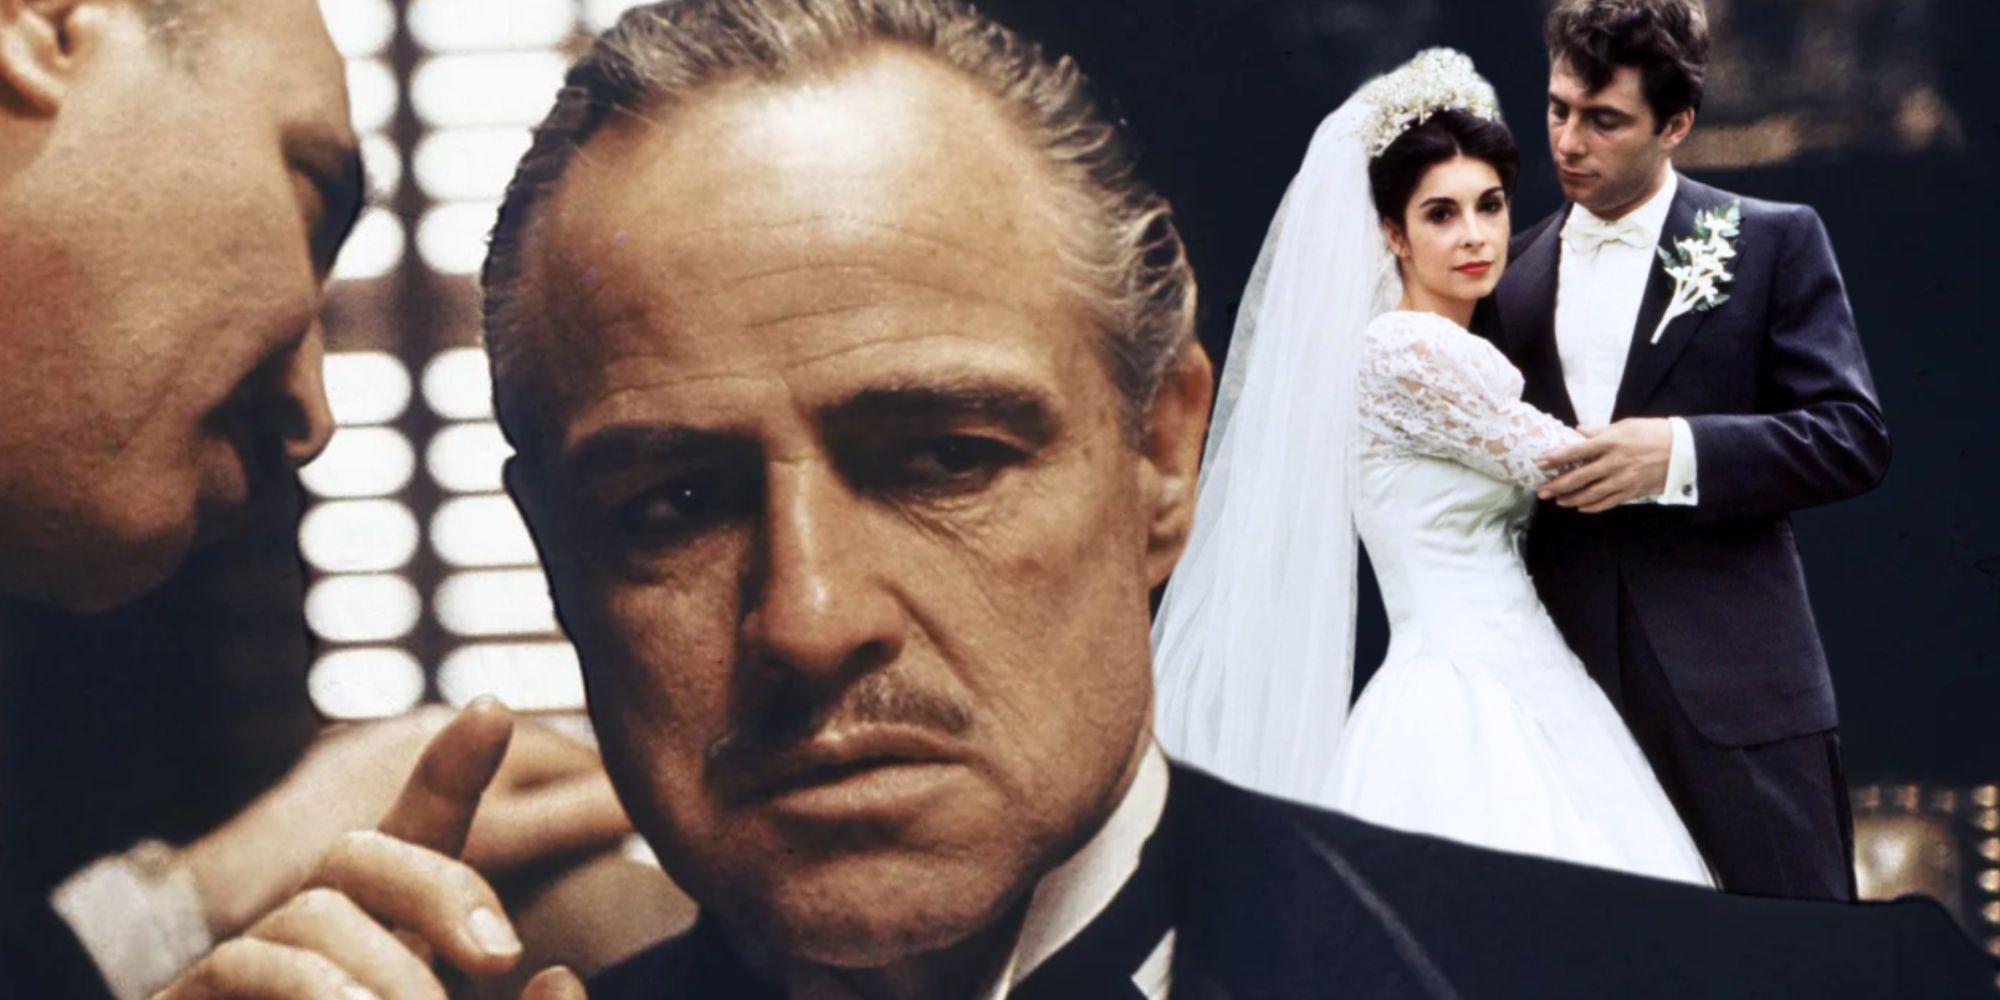 Composite image of Don Corleone and Connie and Carlo on their wedding day